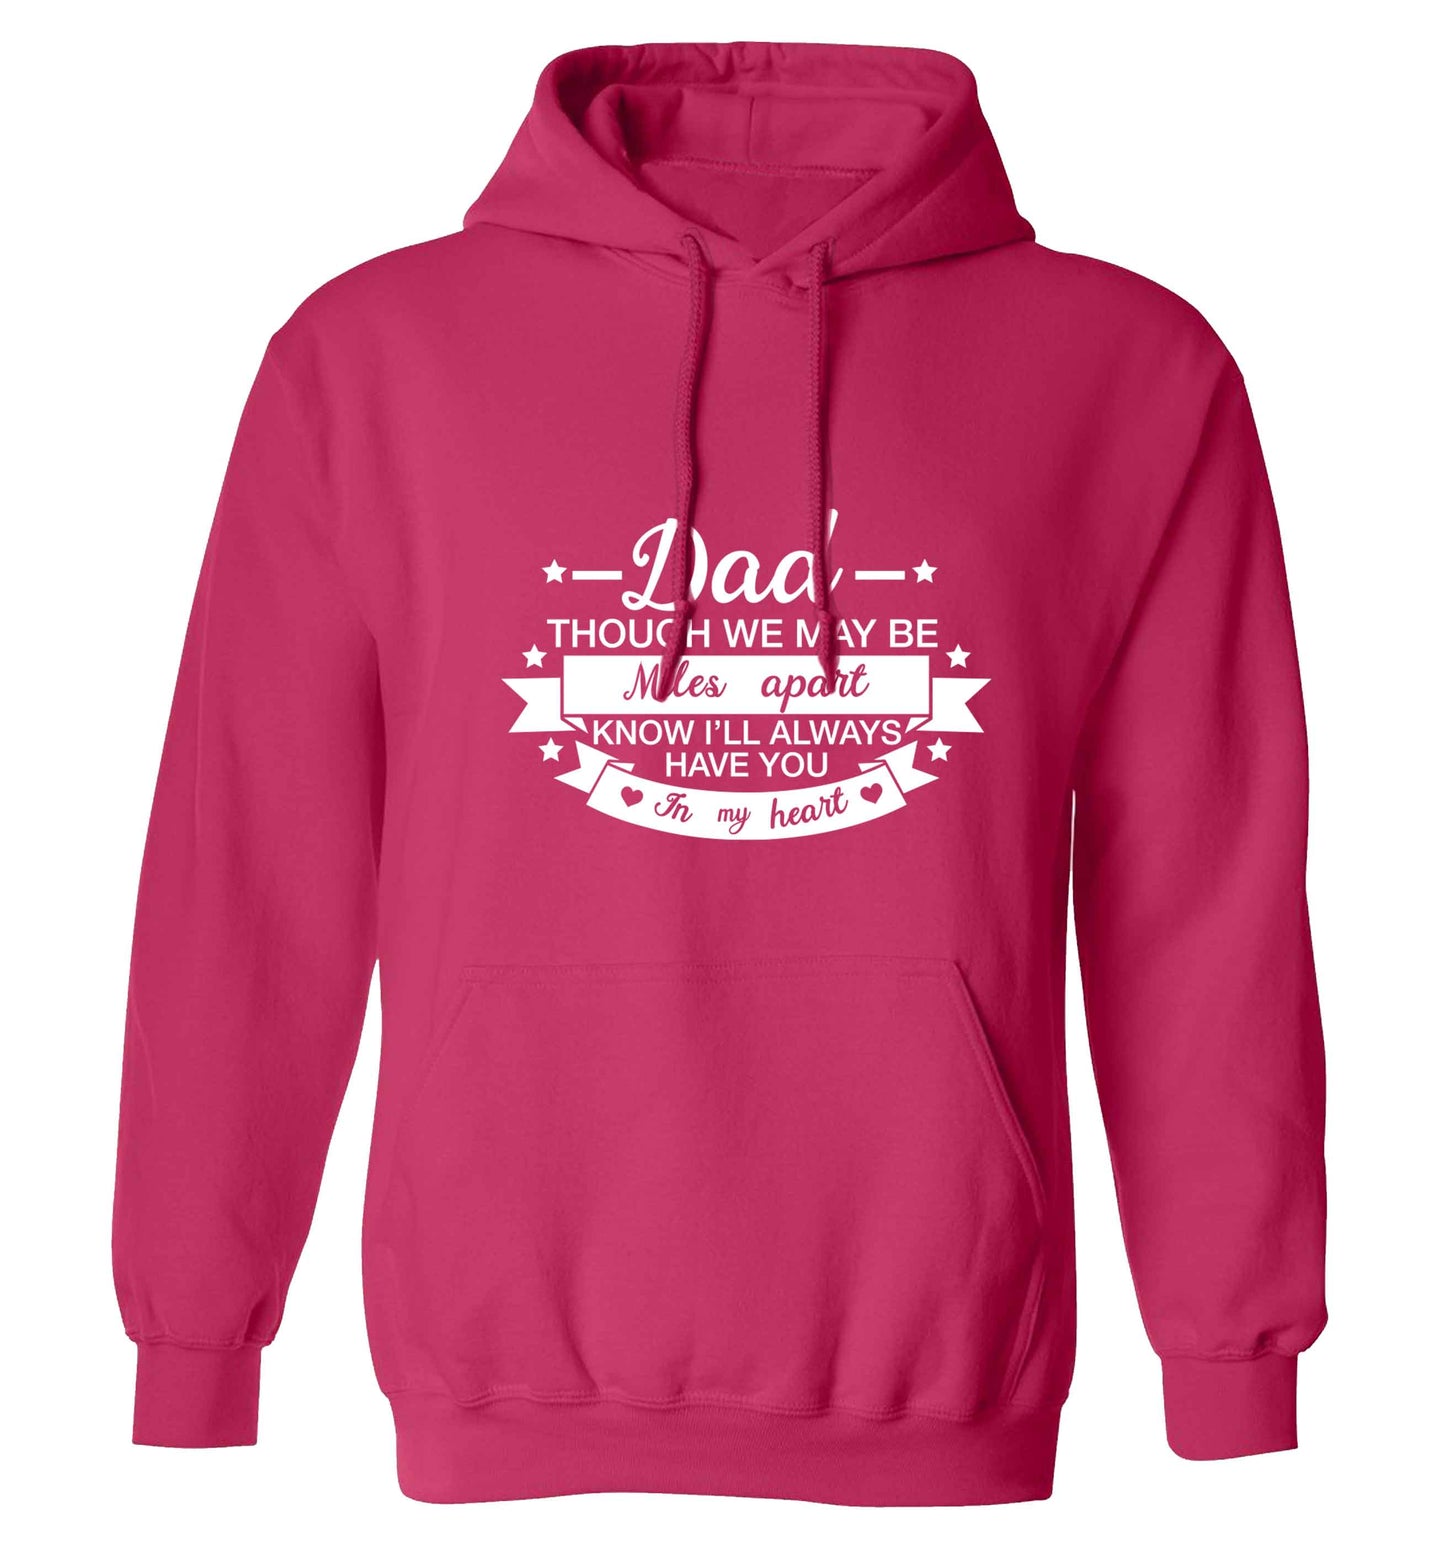 Dad though we are miles apart know I'll always have you in my heart adults unisex pink hoodie 2XL